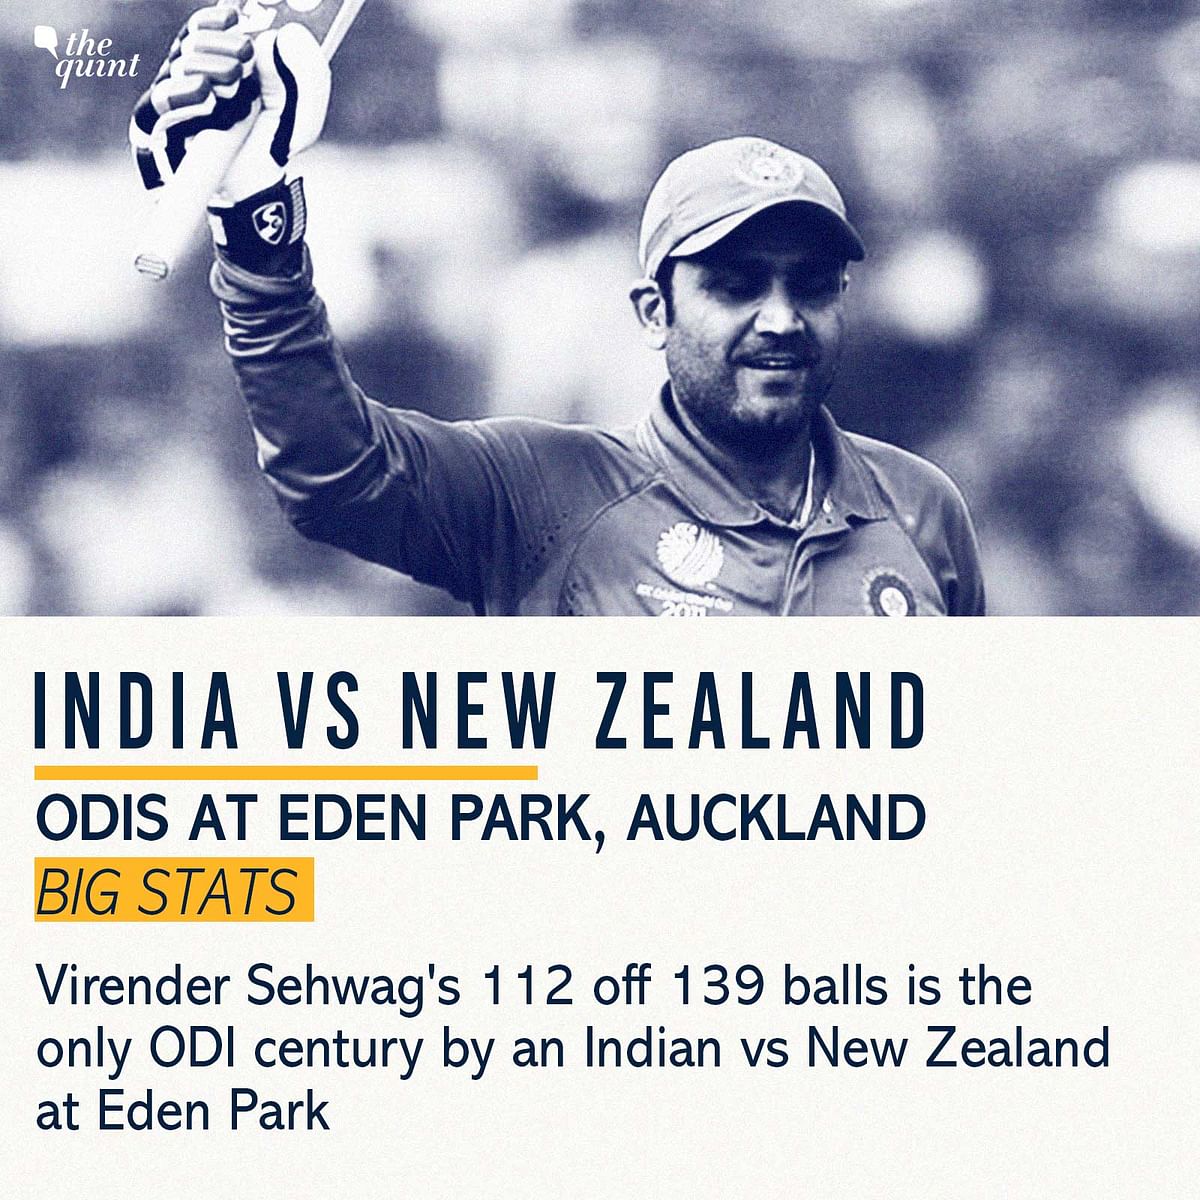 India and New Zealand have played eight matches against each other at the Eden Park stadium in Auckland.